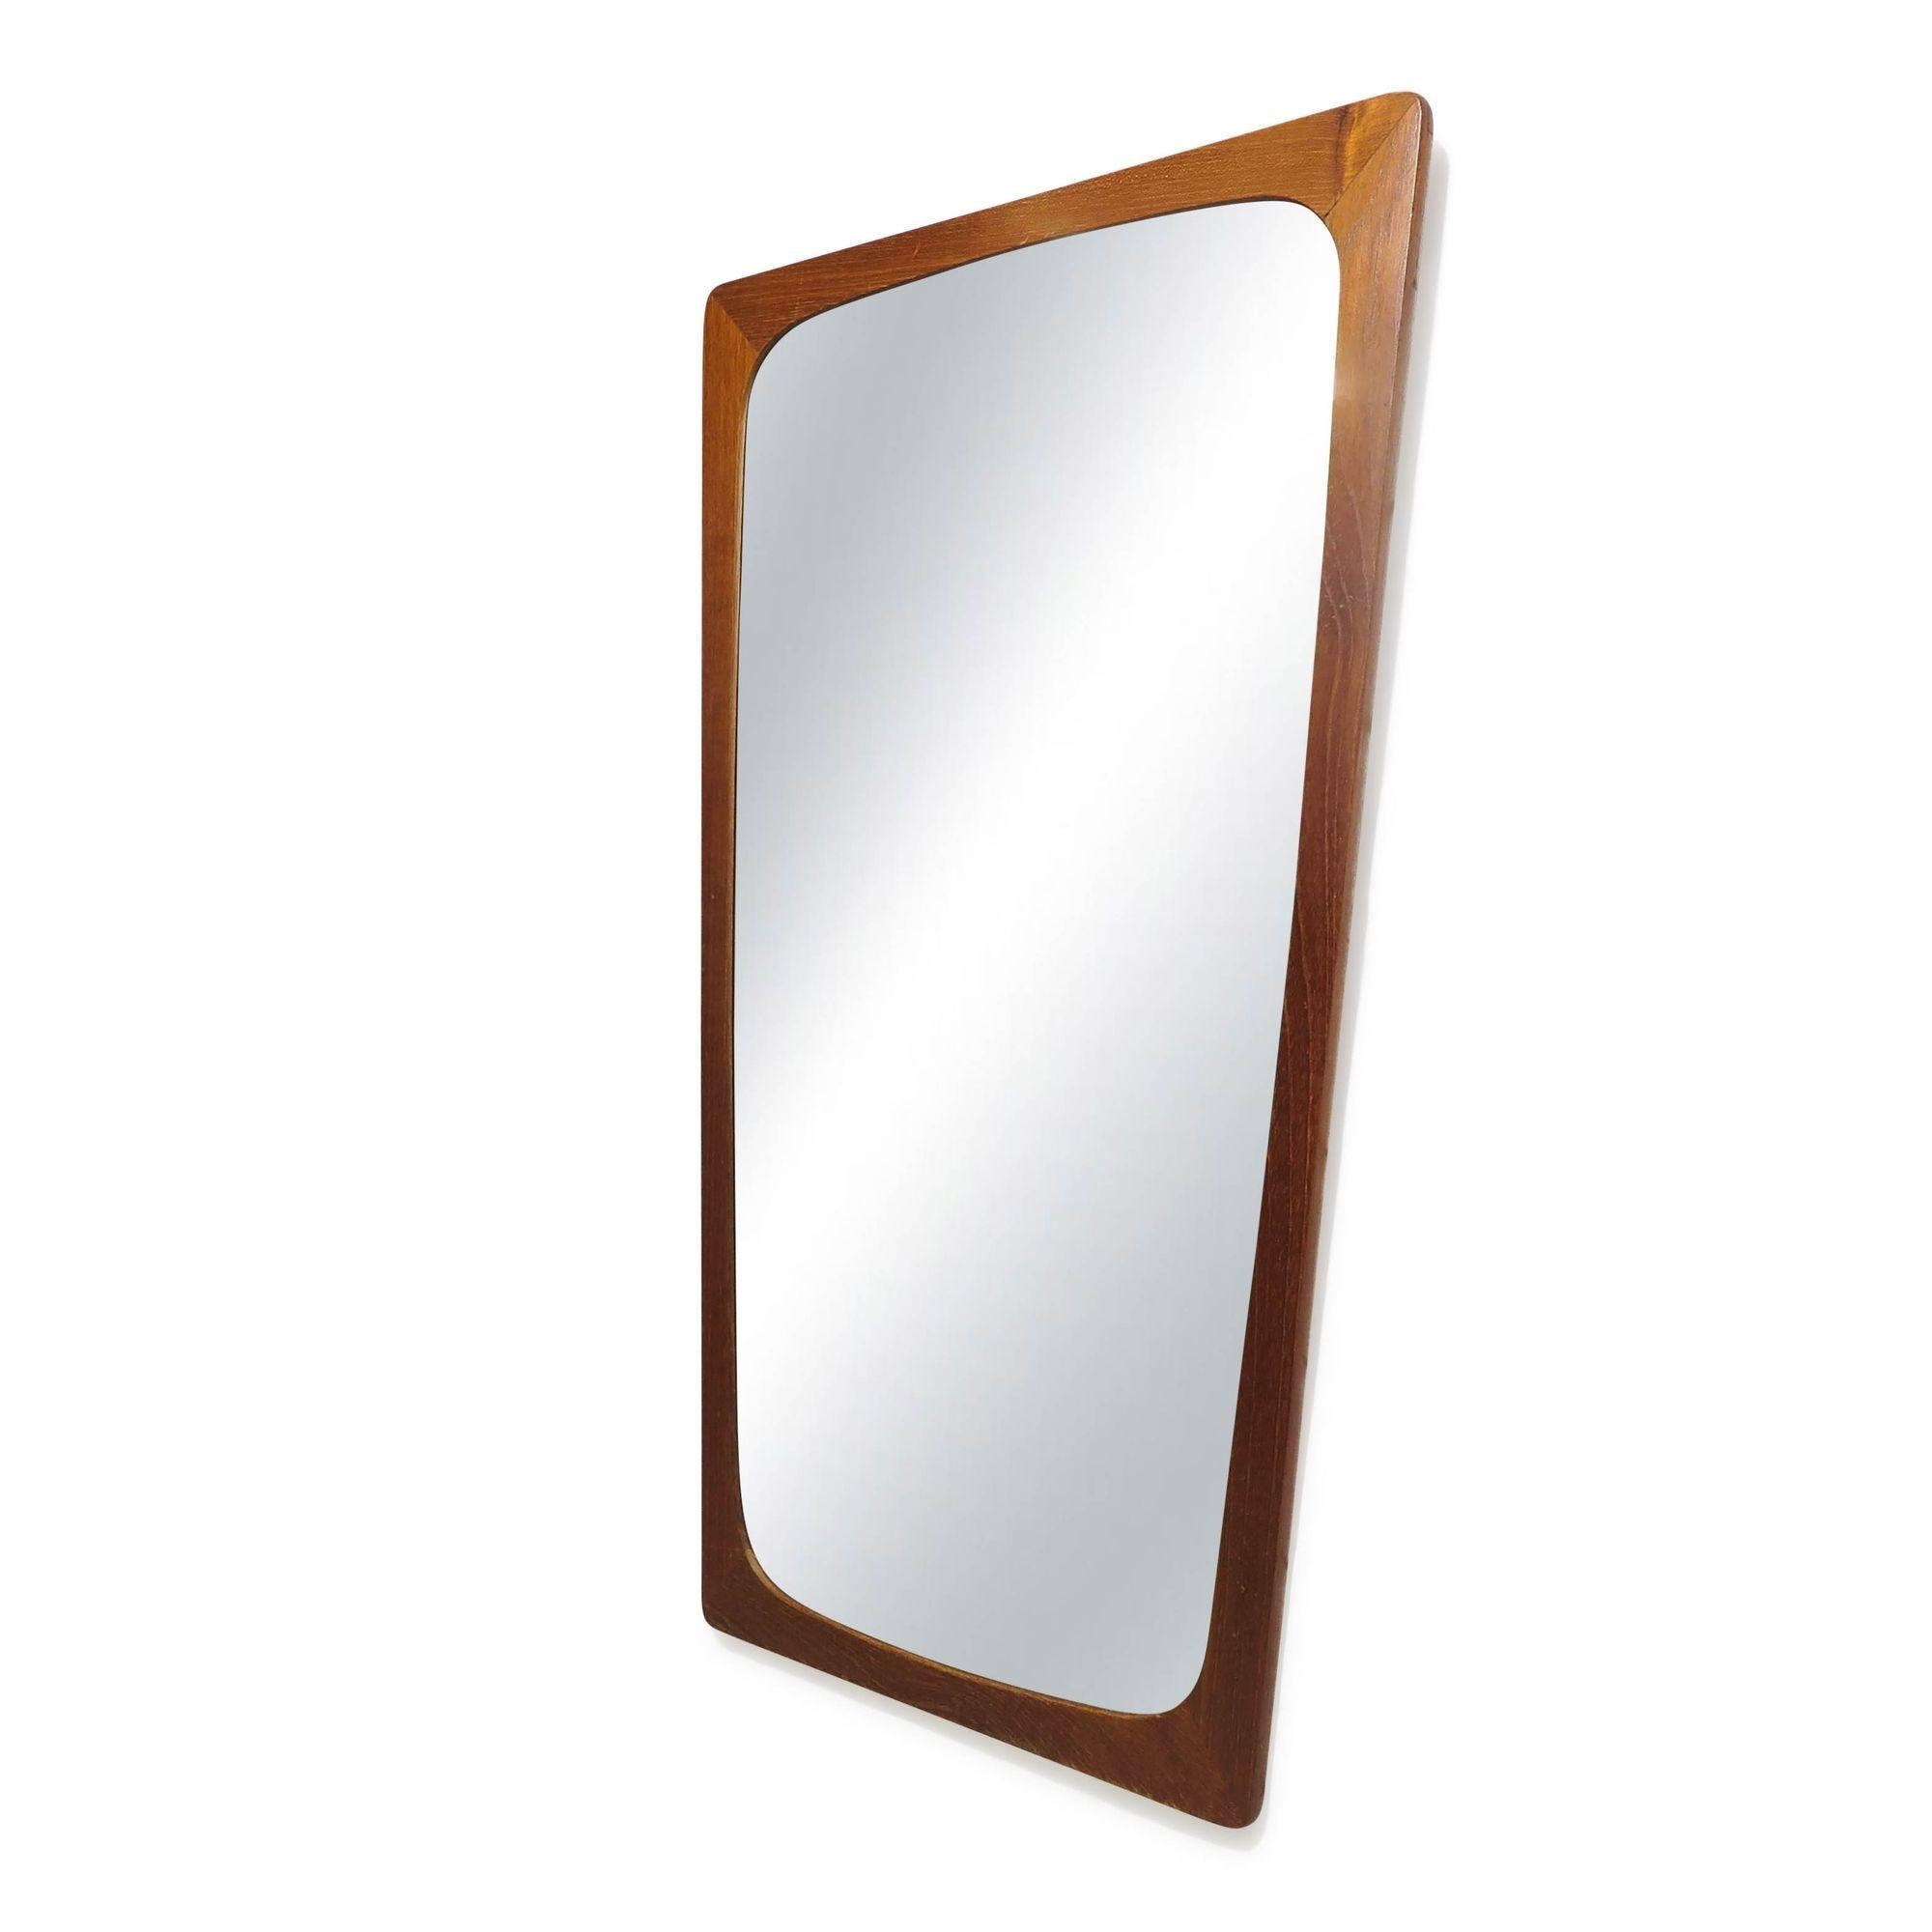 Mid-century Danish Teak Wall Mirror In Good Condition For Sale In Oakland, CA